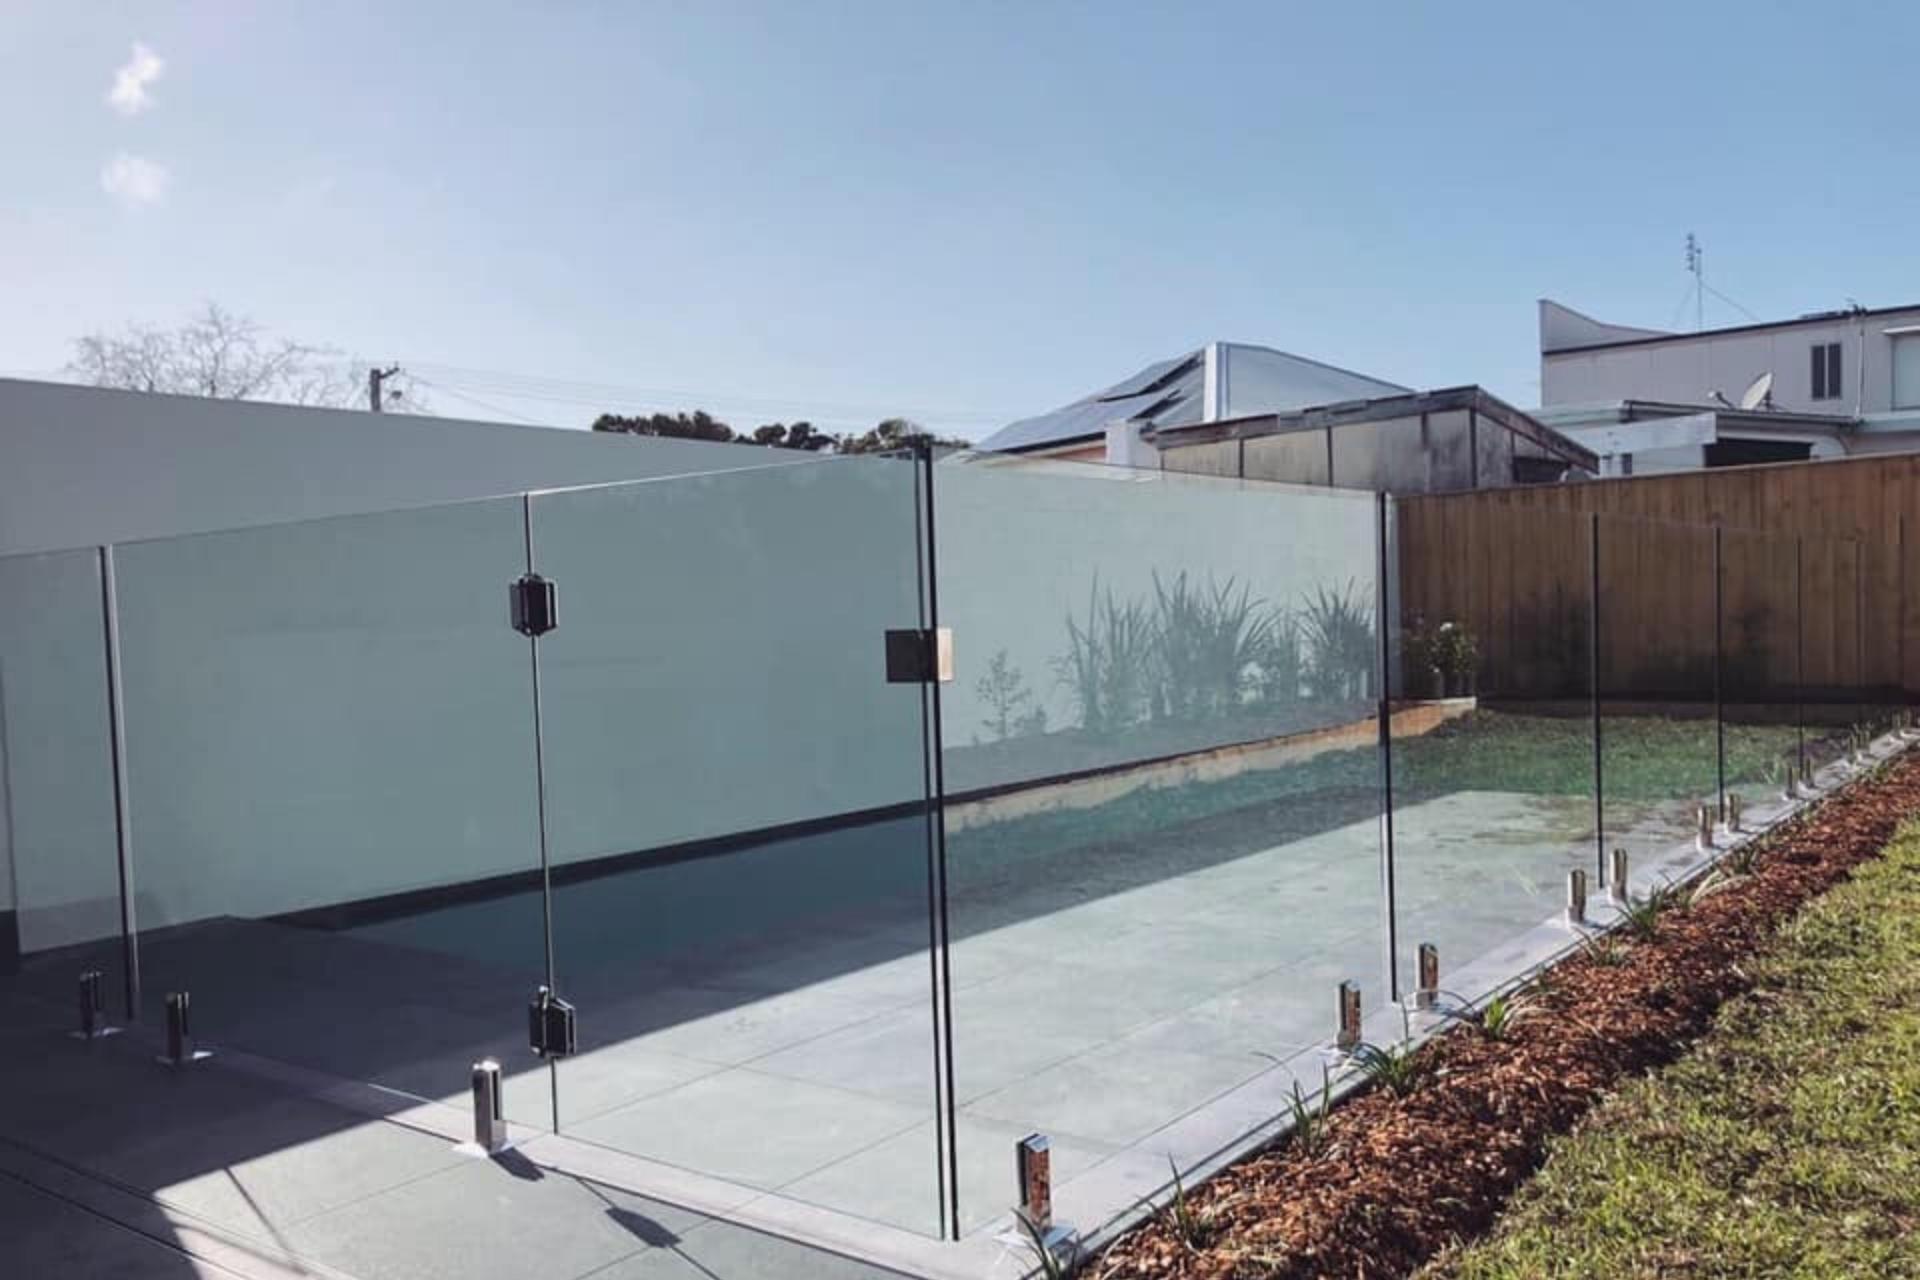 Services<br />
Pool fencing - Contemporary Stainless Steel